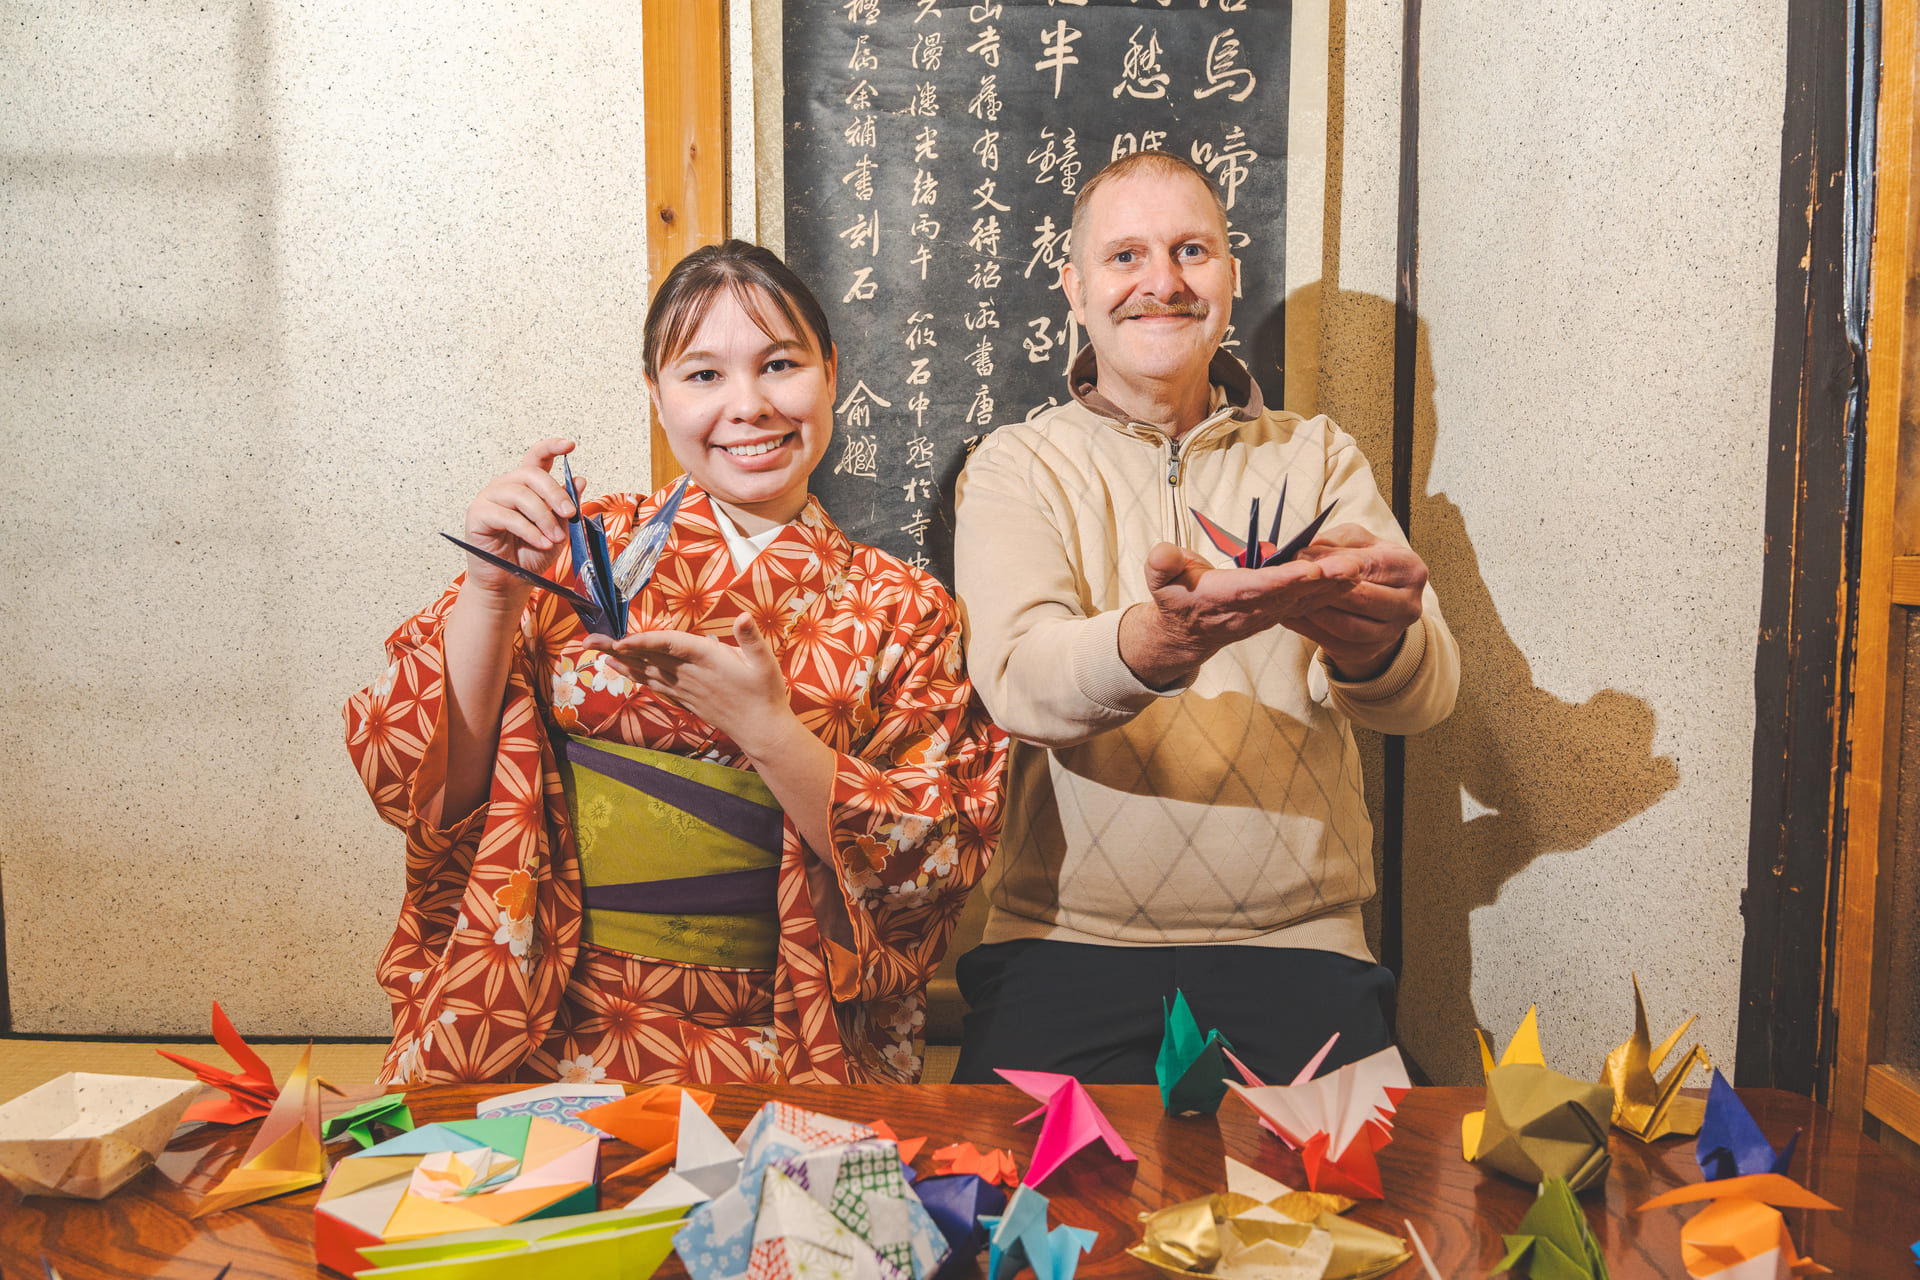 Japanese Cultural Experiences at Kyoto Abeya. A woman in a kimono and a man in a sweater displaying colorful origami birds, with a variety of folded origami figures spread on the table in front of a blackboard with Japanese calligraphy.